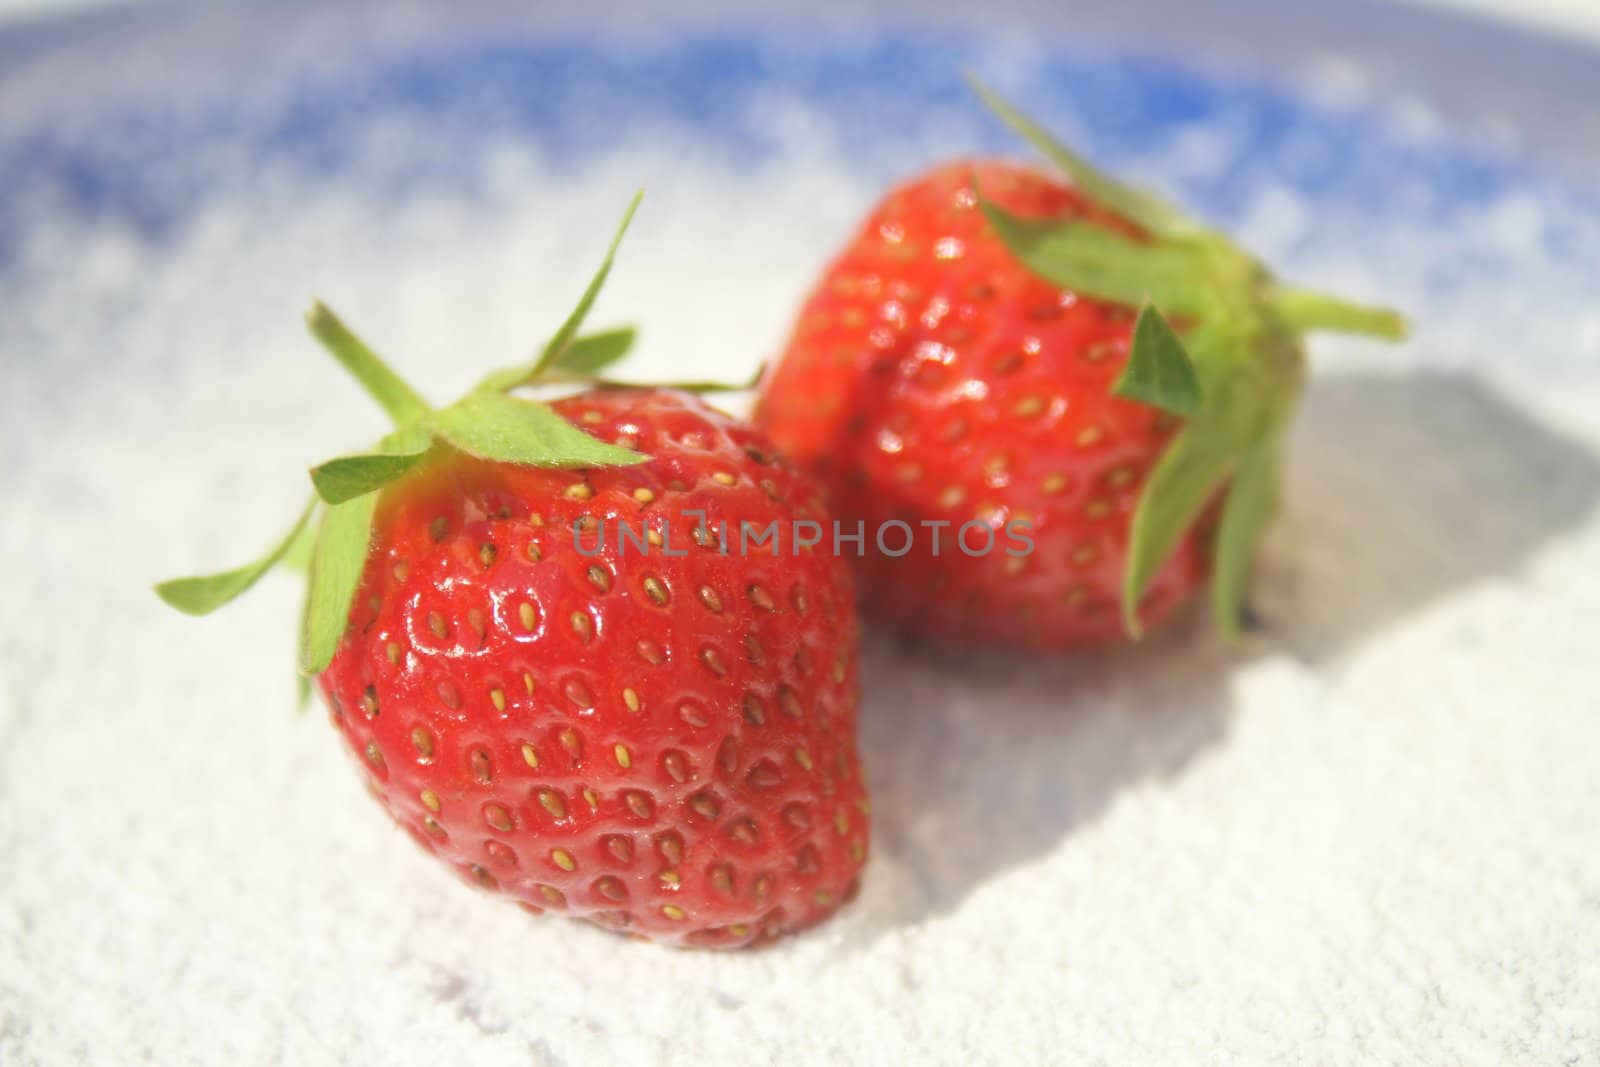 Two ripe red strawberries on blue plate and powdered sugar under them